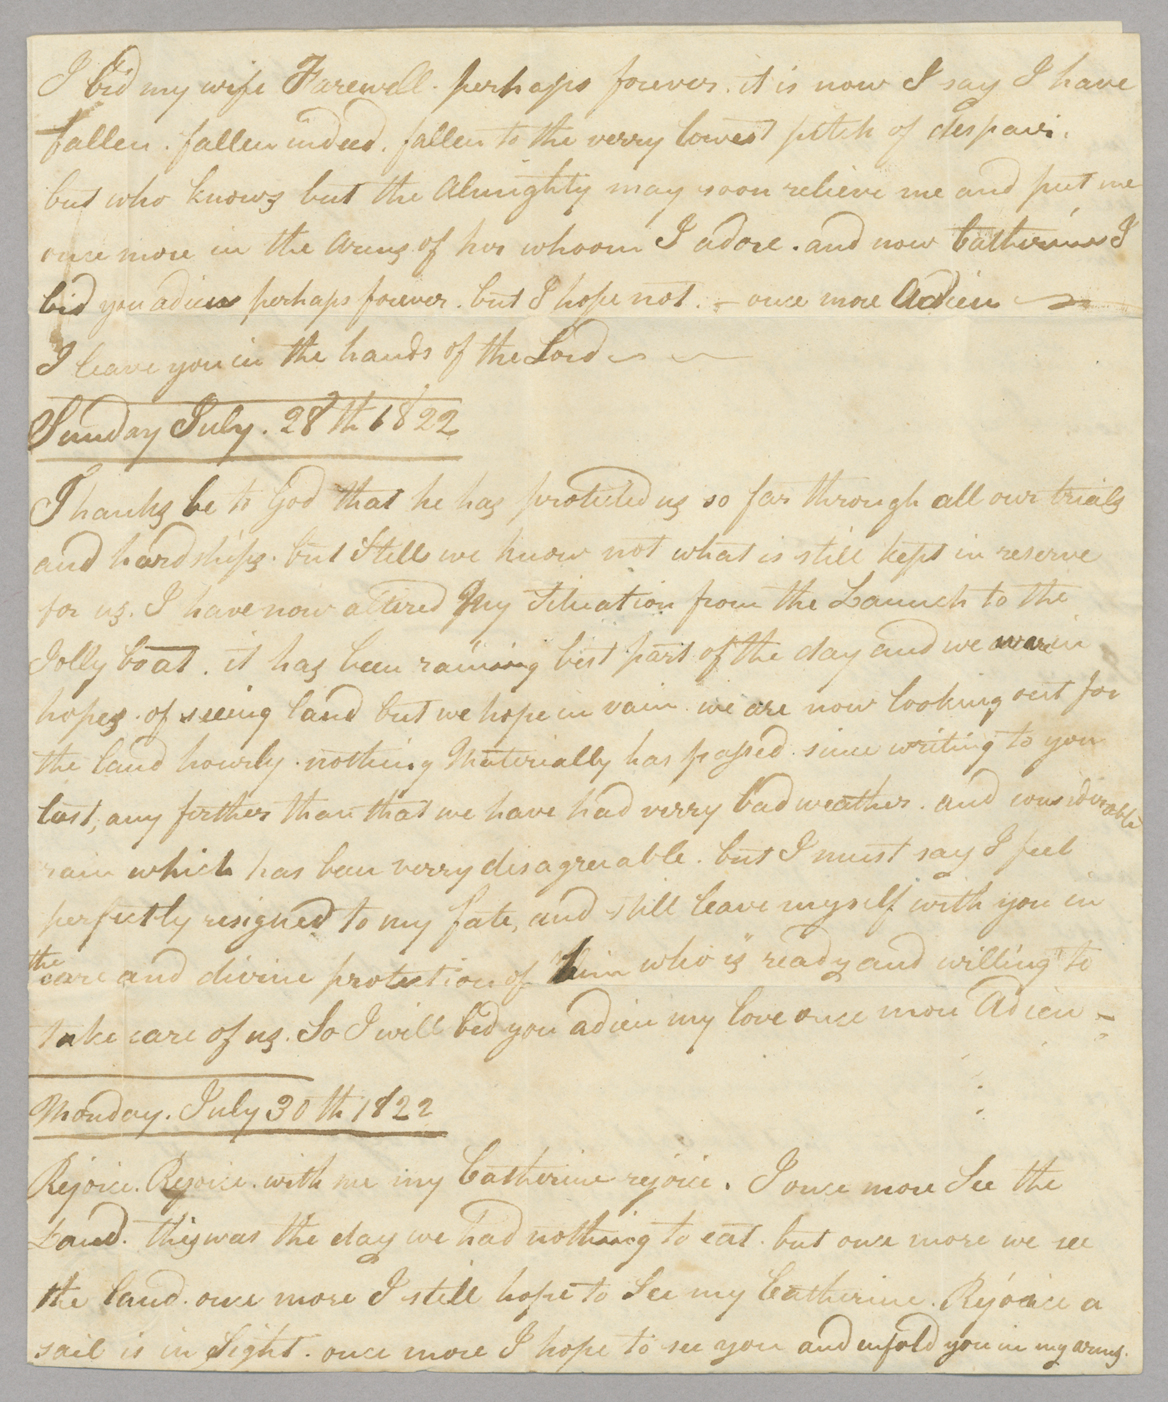 Letter, [Hewlett Townsend Coles], "Ship Liverpool's Boats towards St. Johns," to [Catherine Van Suydam Coles], n.p., Page 1